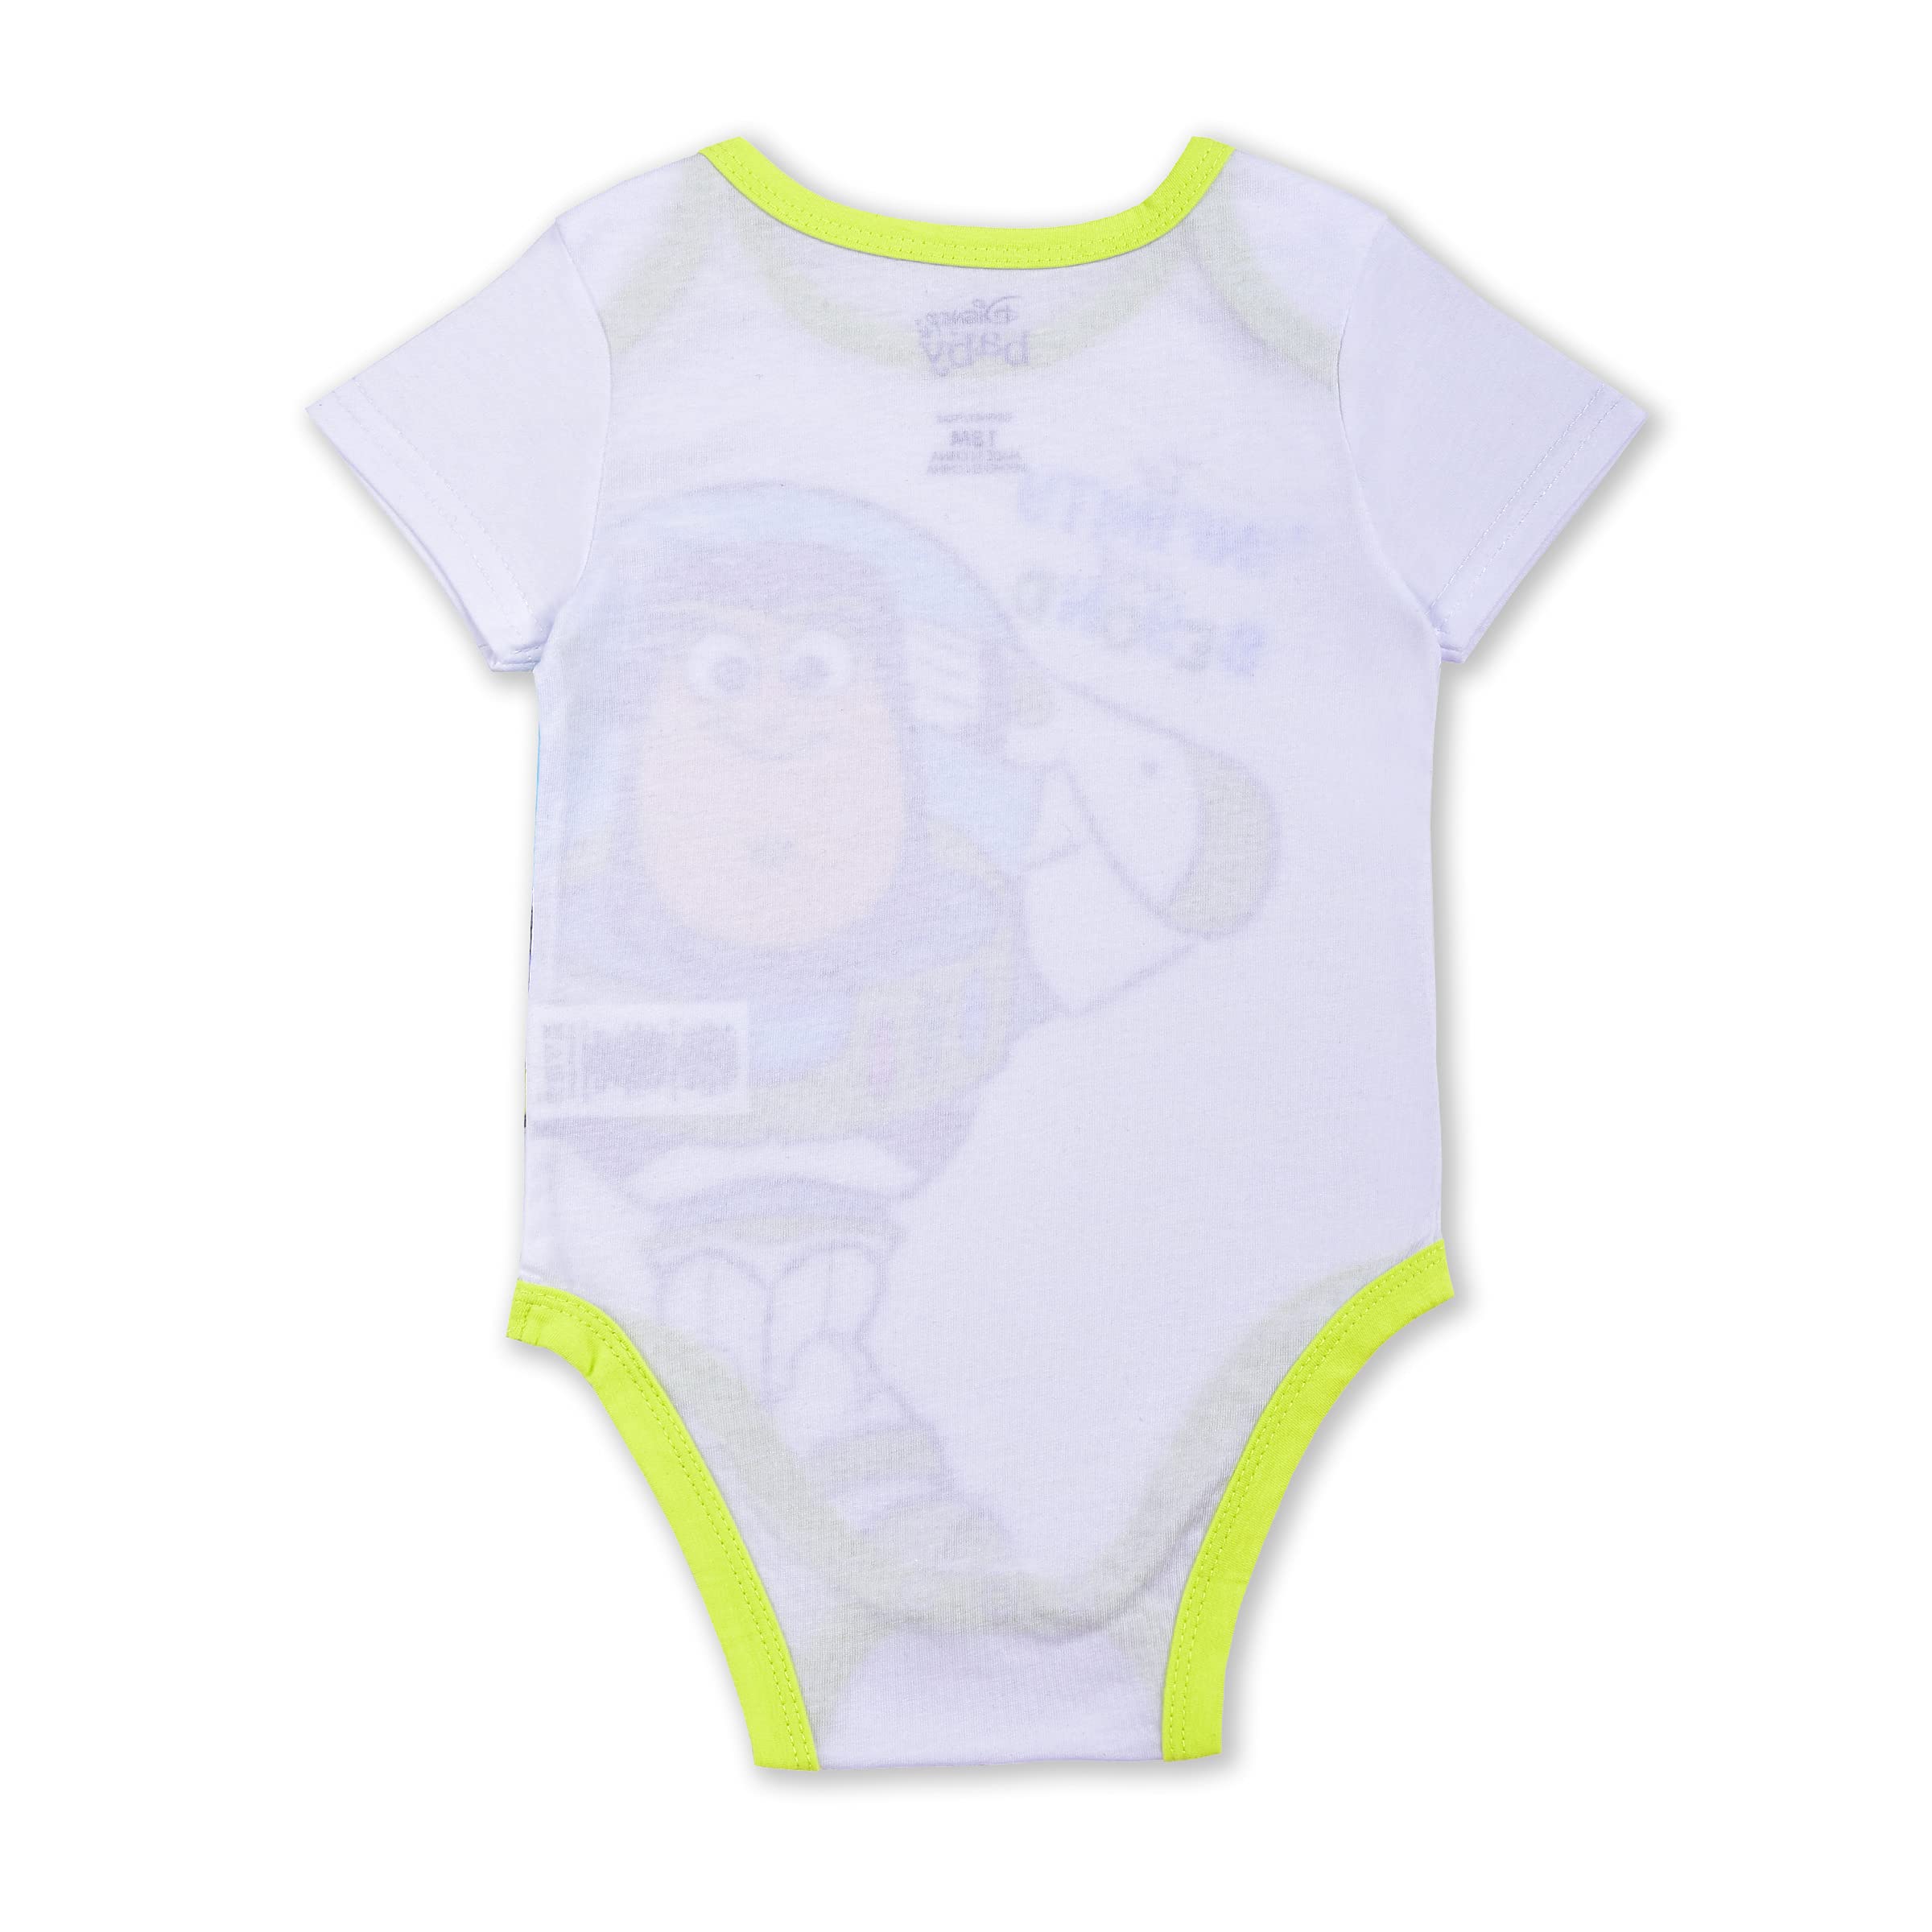 Disney Toy Story Boys Woody, Buzz Lightyear and Rex 3 Pack Bodysuit Creeper for Newborn and Infant – Yellow/Green/White